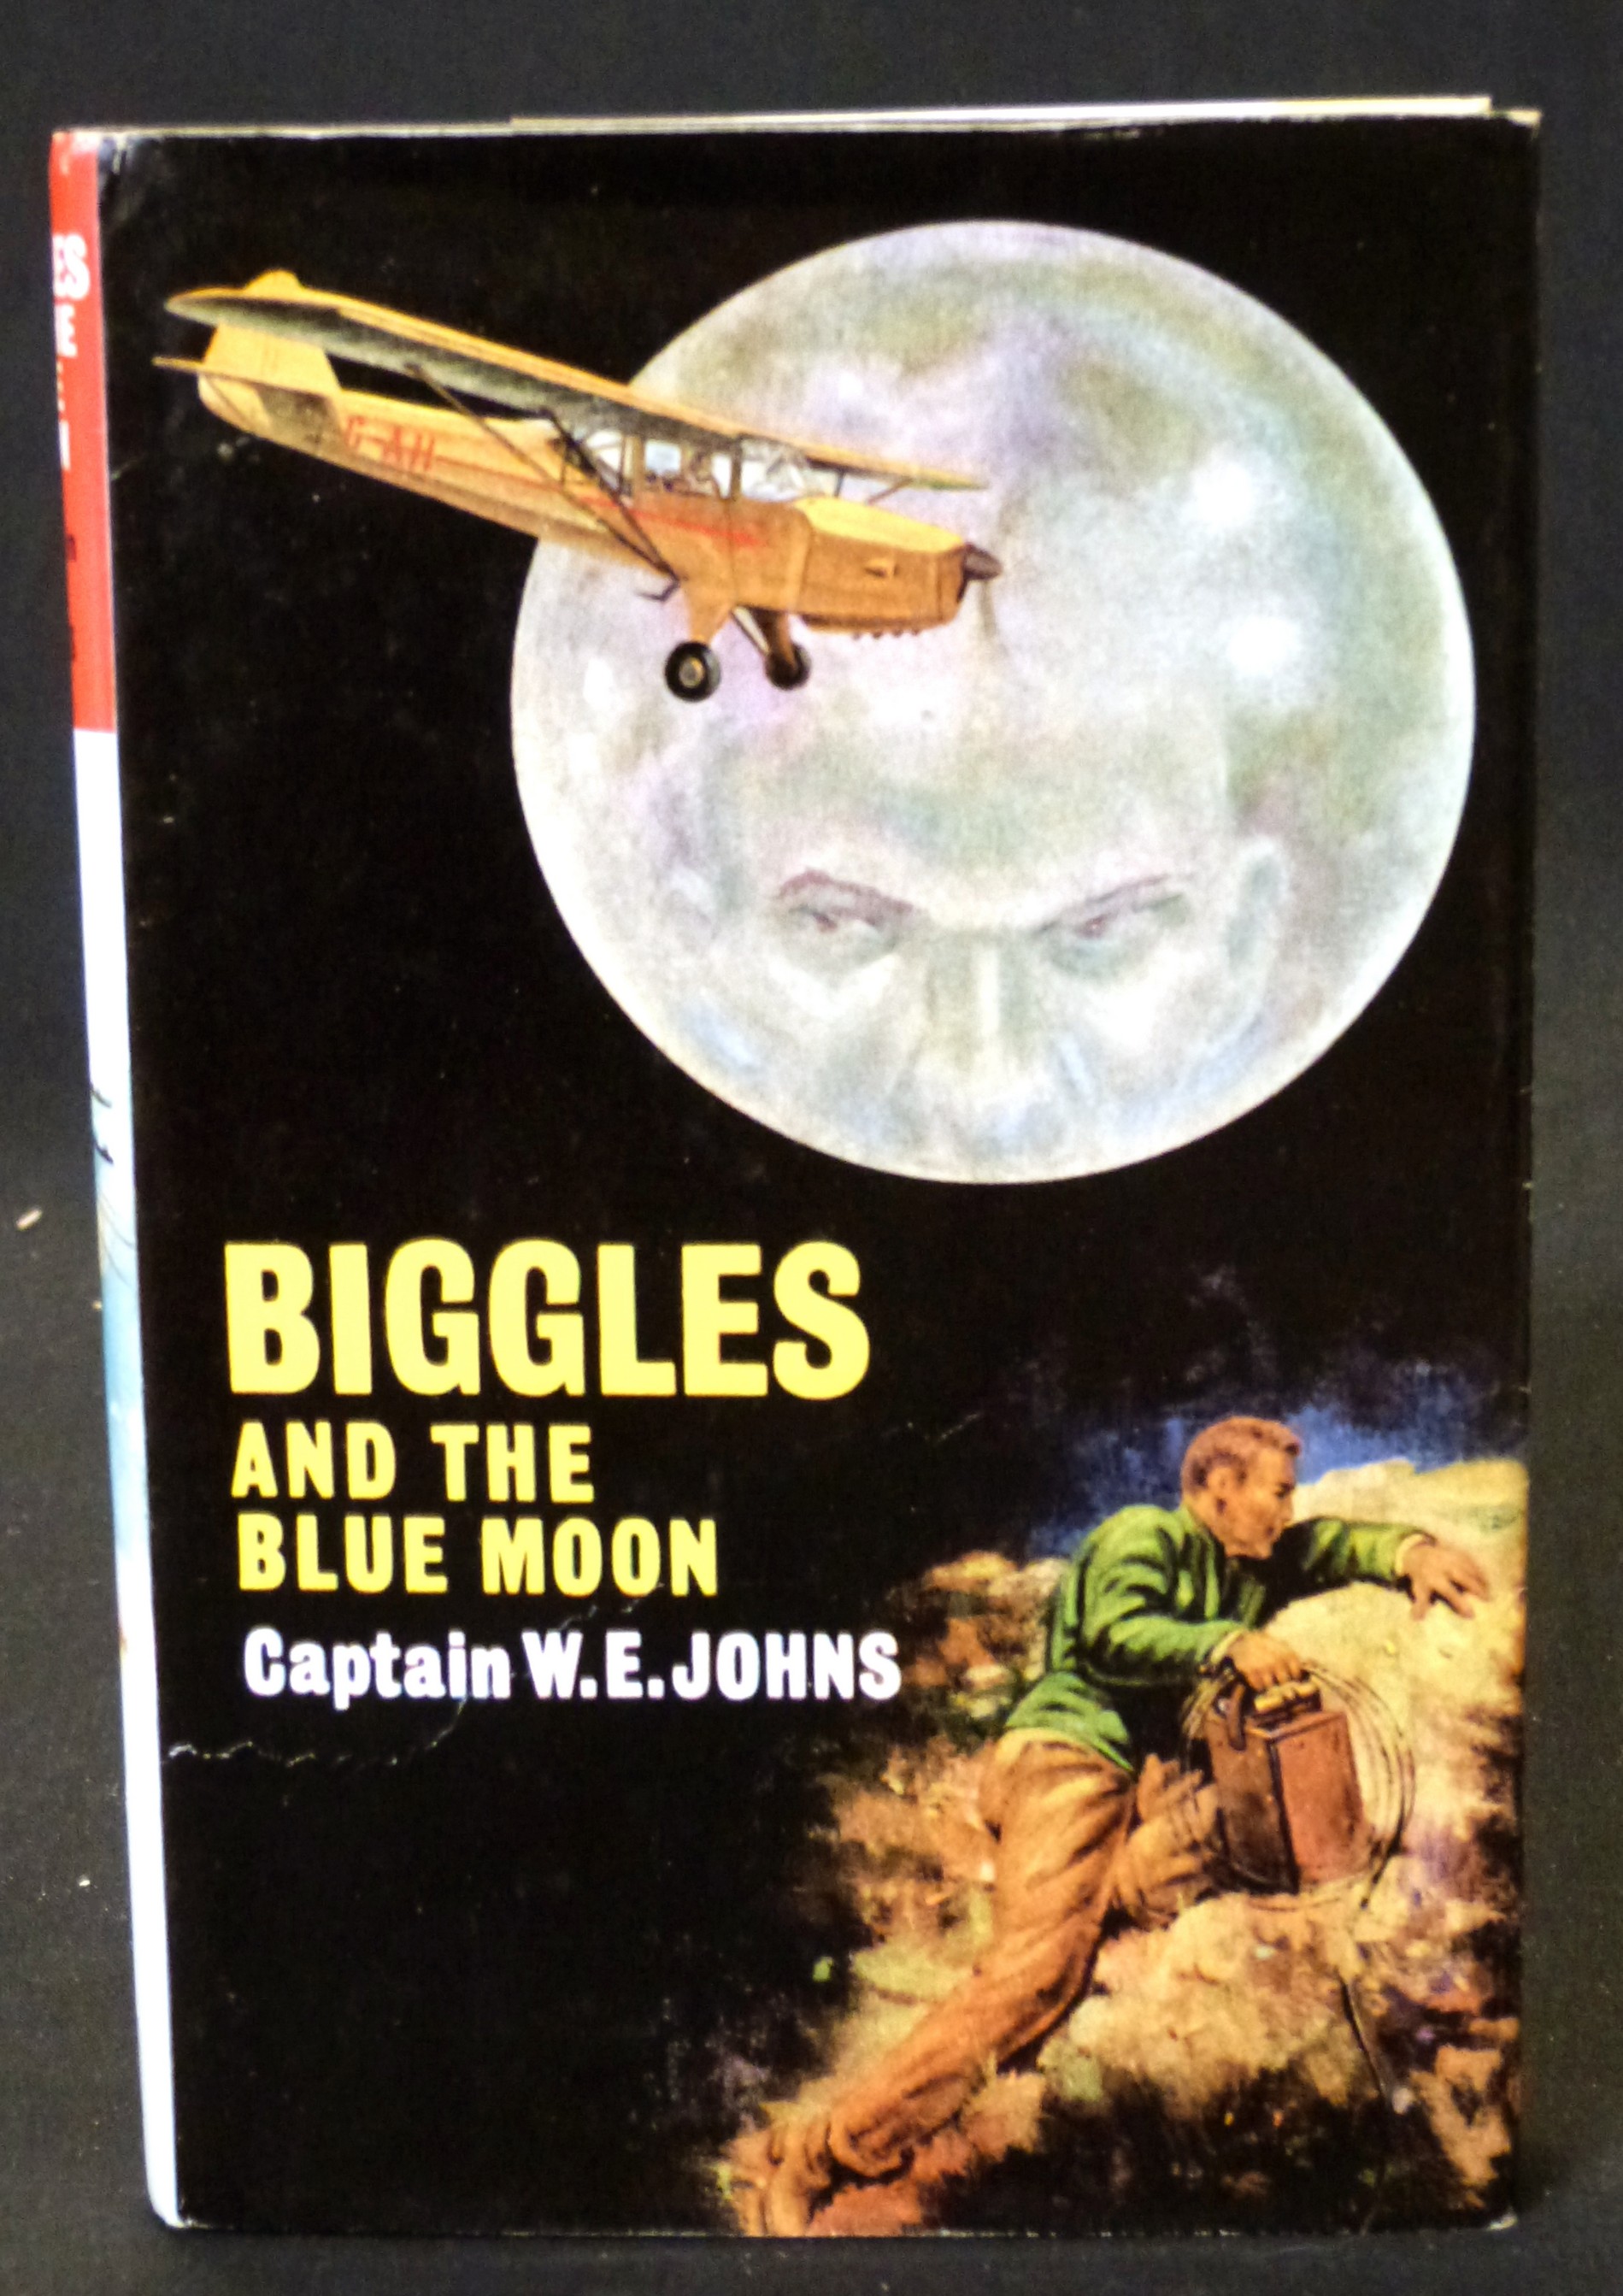 W E JOHNS: BIGGLES AND THE BLUE MOON, Leicester, Brockhampton Press, 1965, 1st edition, ref no verso